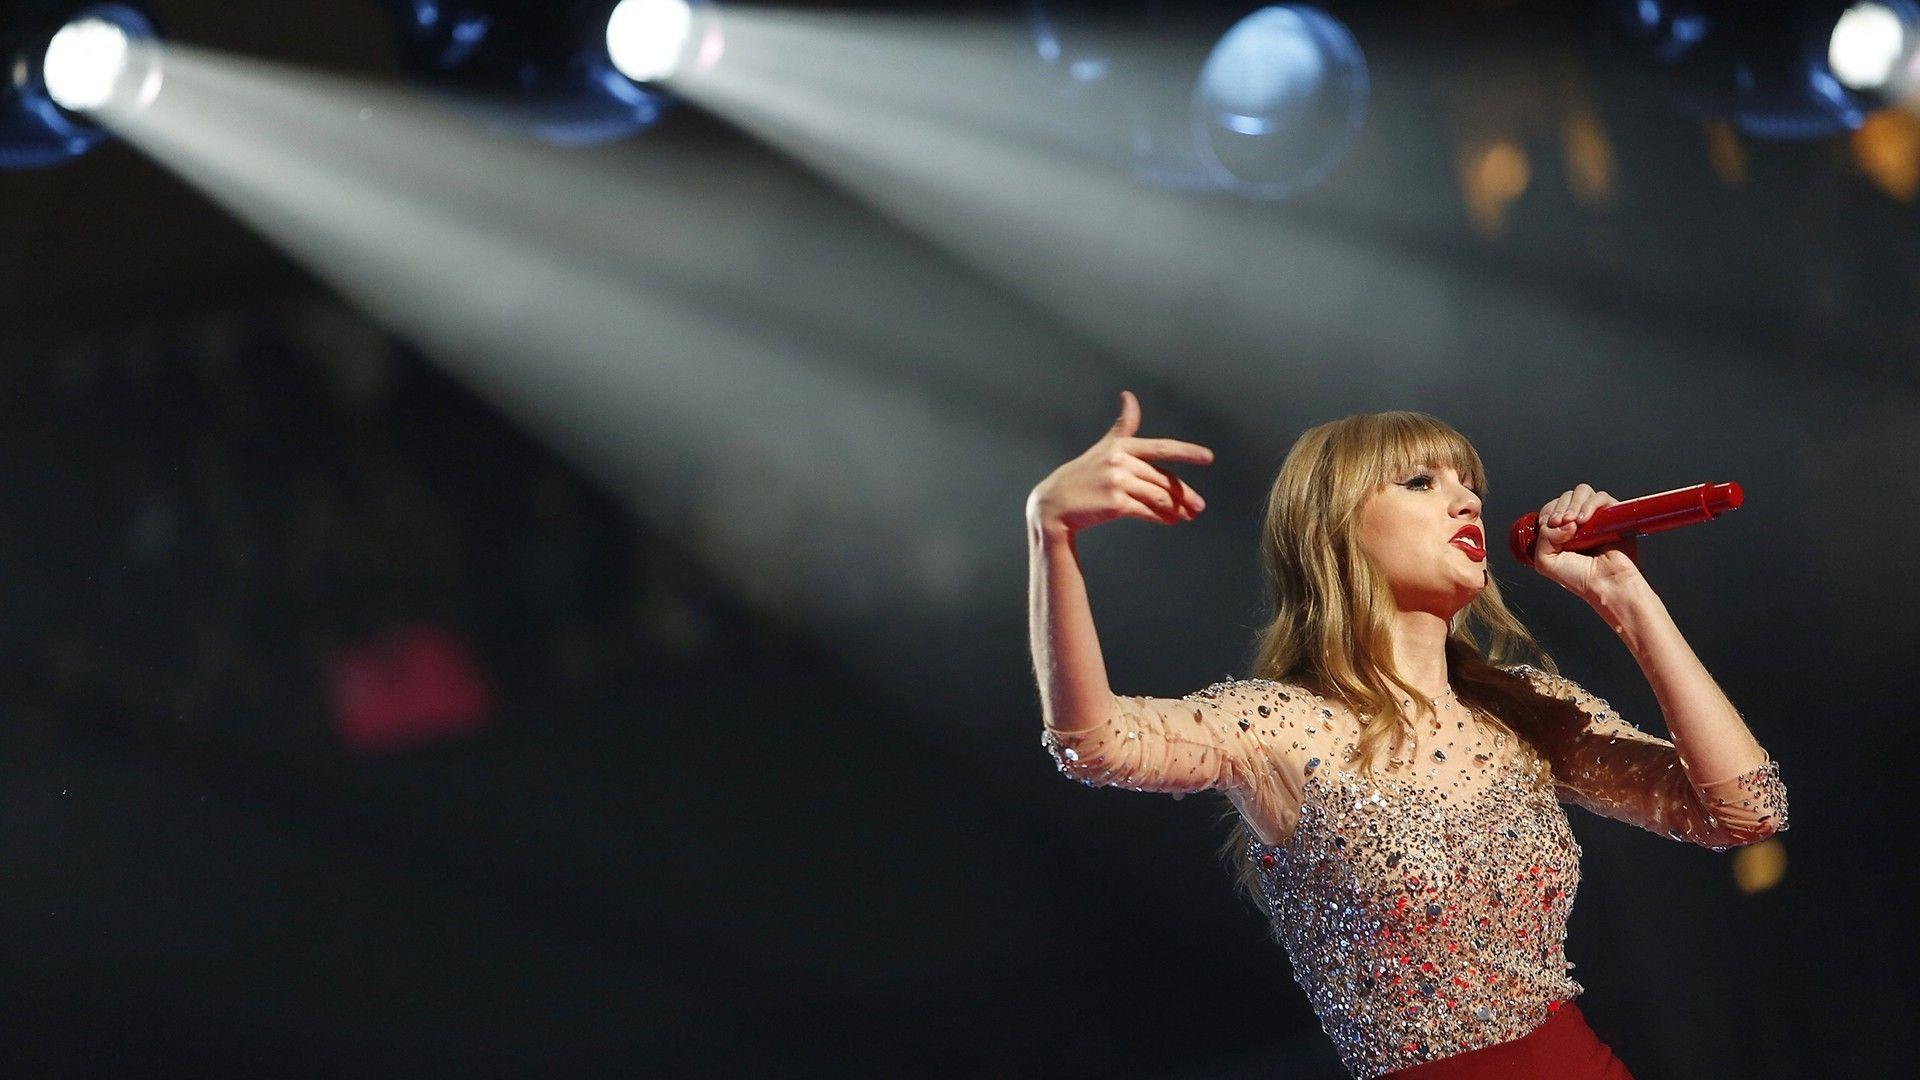 Lovely Pic of Taylor Swift During Live Perfomance on Mic HD Photo